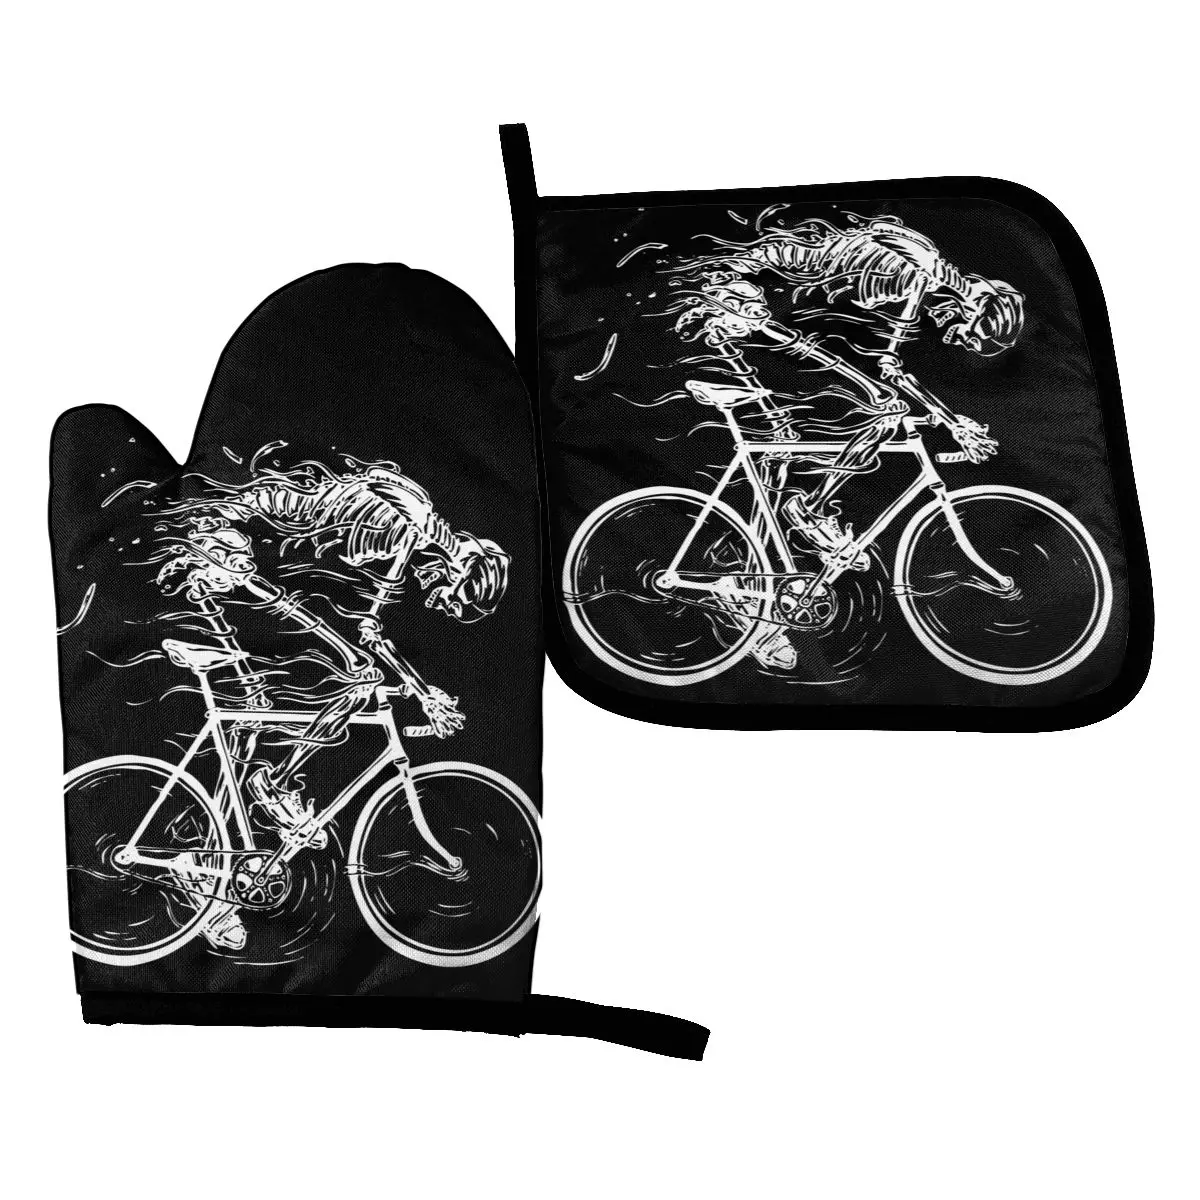 

Skeleton Skull Cycle Oven Mitts Potholder Mat Baking Oven Kitchen Cooking Gloves Microwave Insulation Pad Polyester Gloves